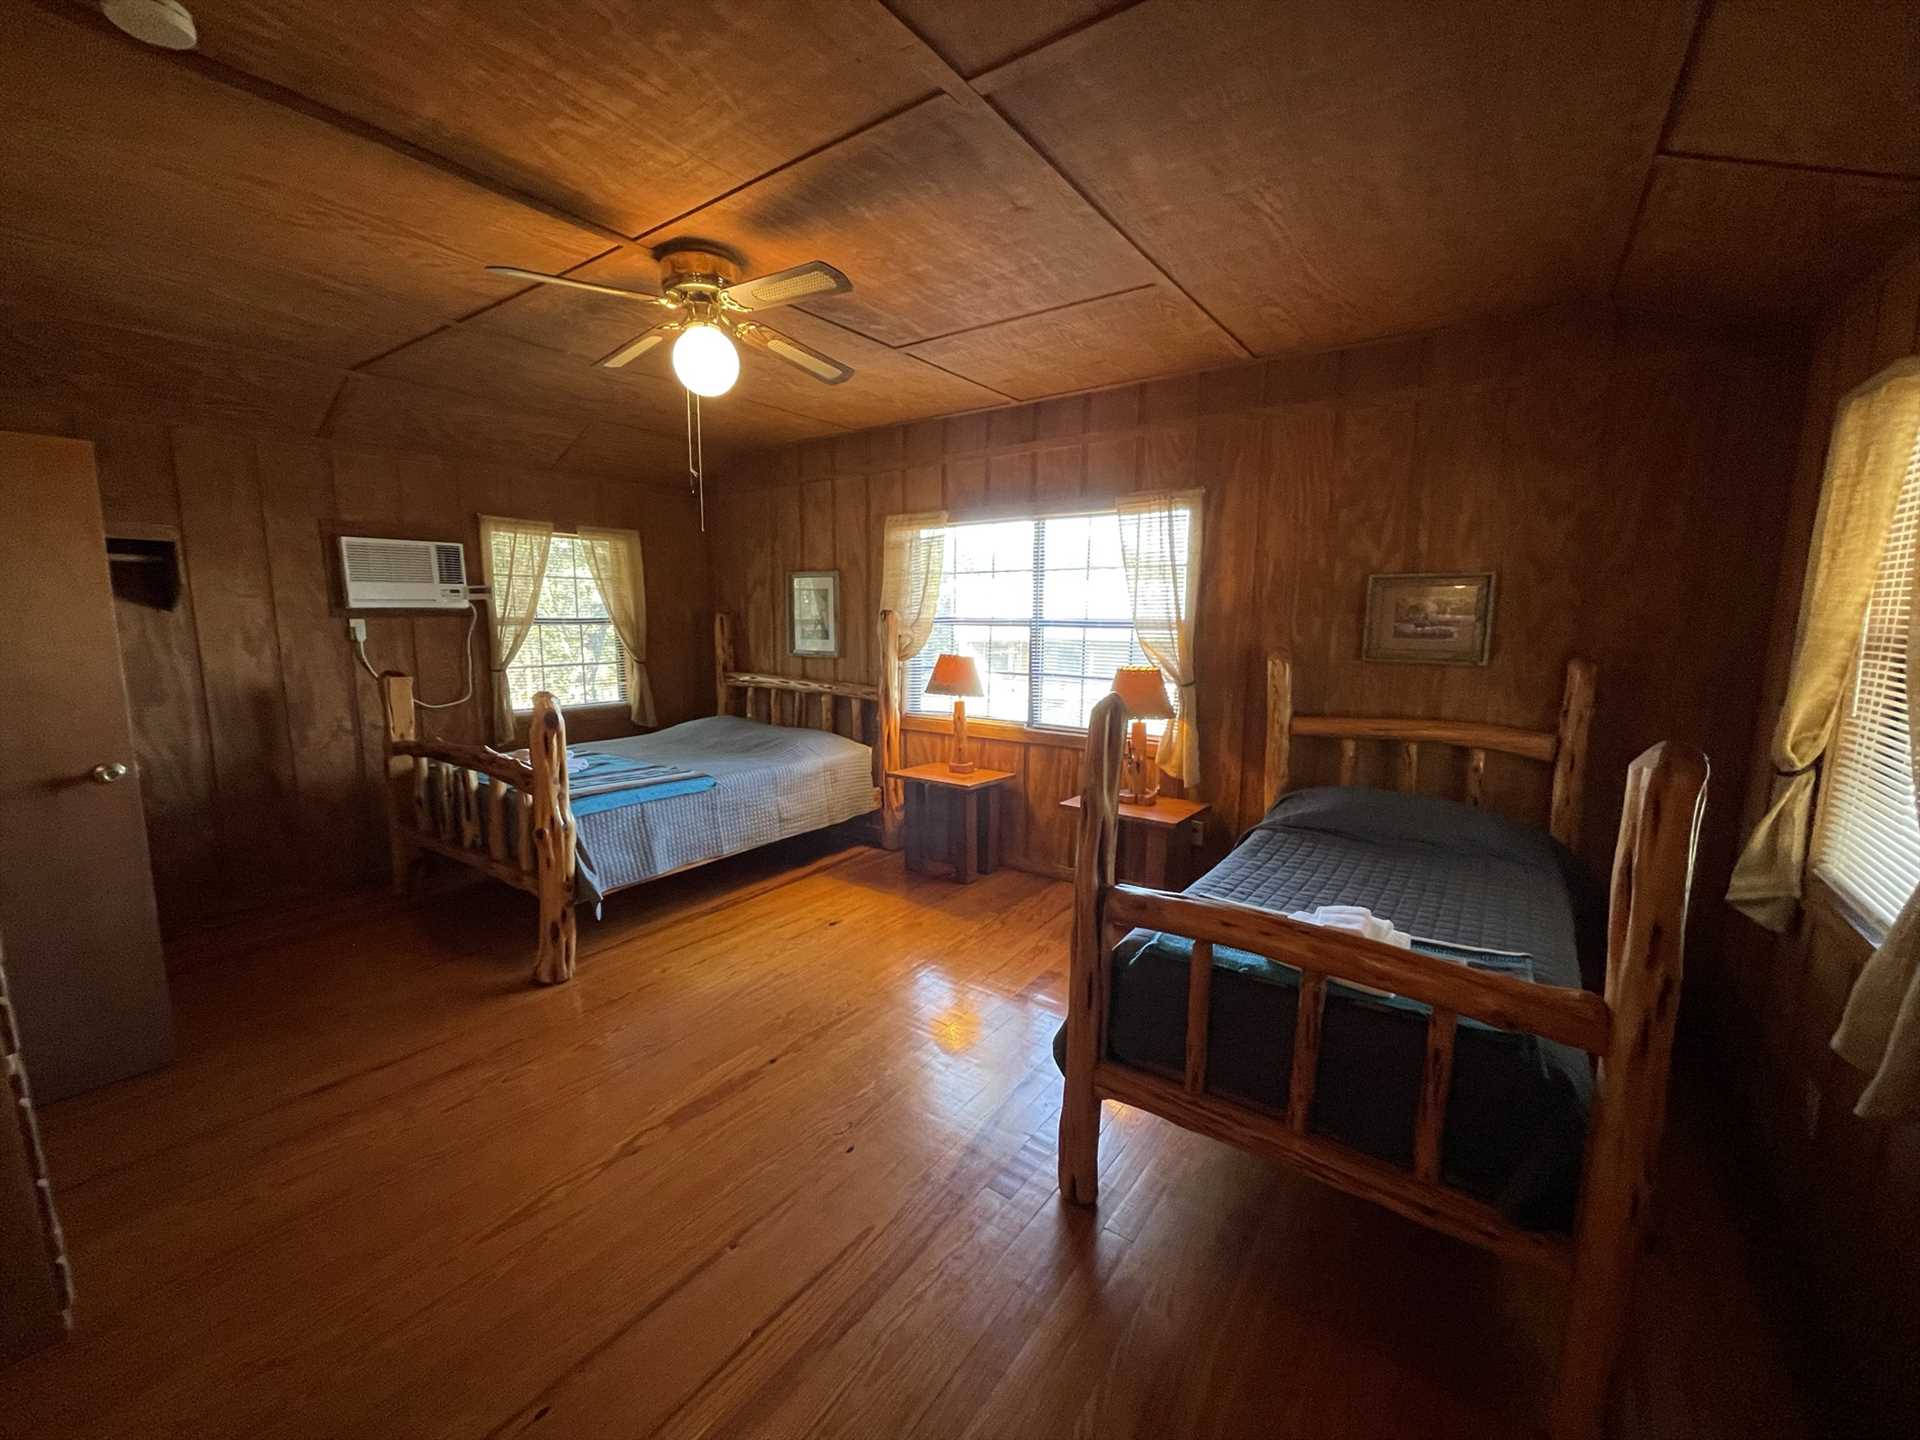                                                 A queen and twin bed in Redbud Room #11 provide restful slumber for up to three, and clean bed liens are also included.